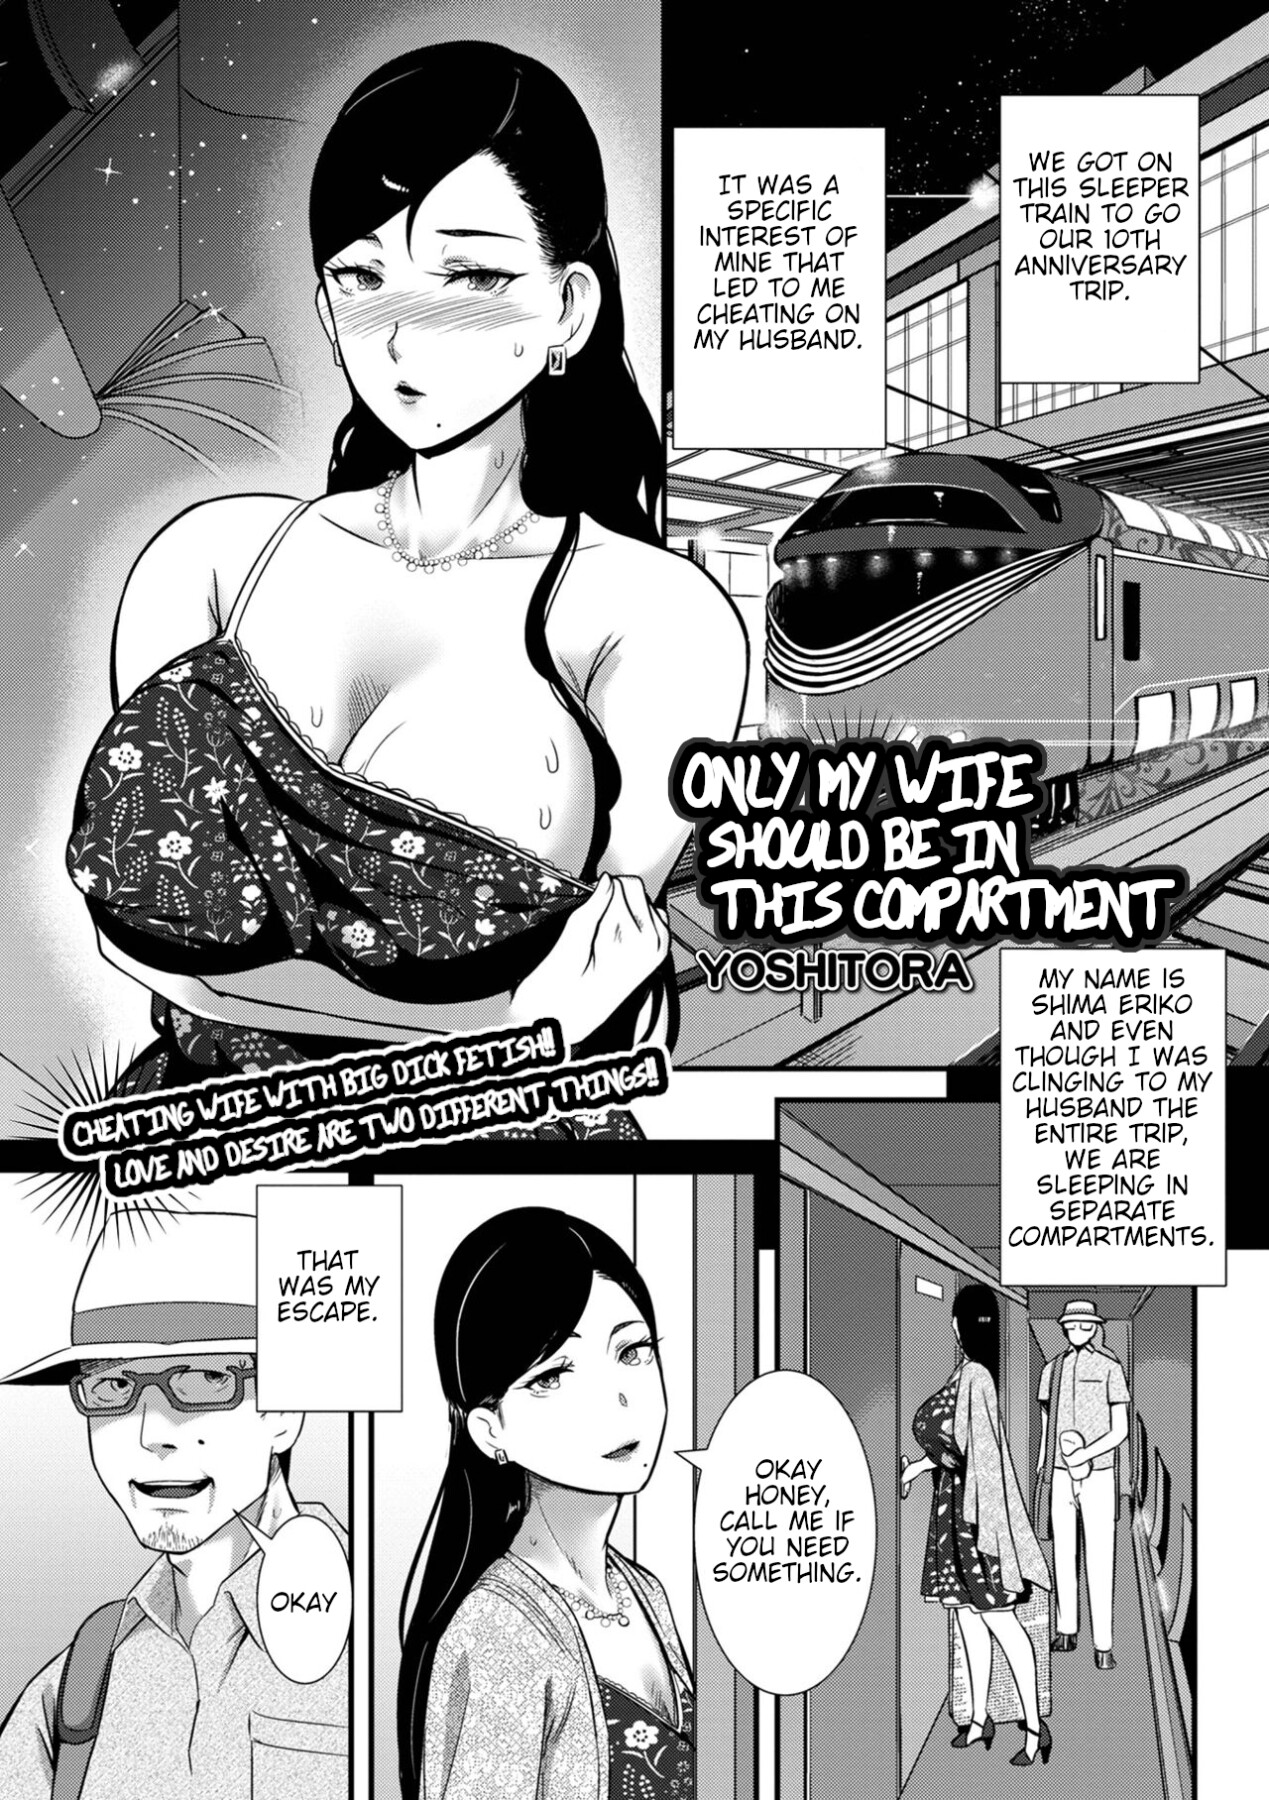 Hentai Manga Comic-Only My Wife Should Be In This Compartment-Read-1